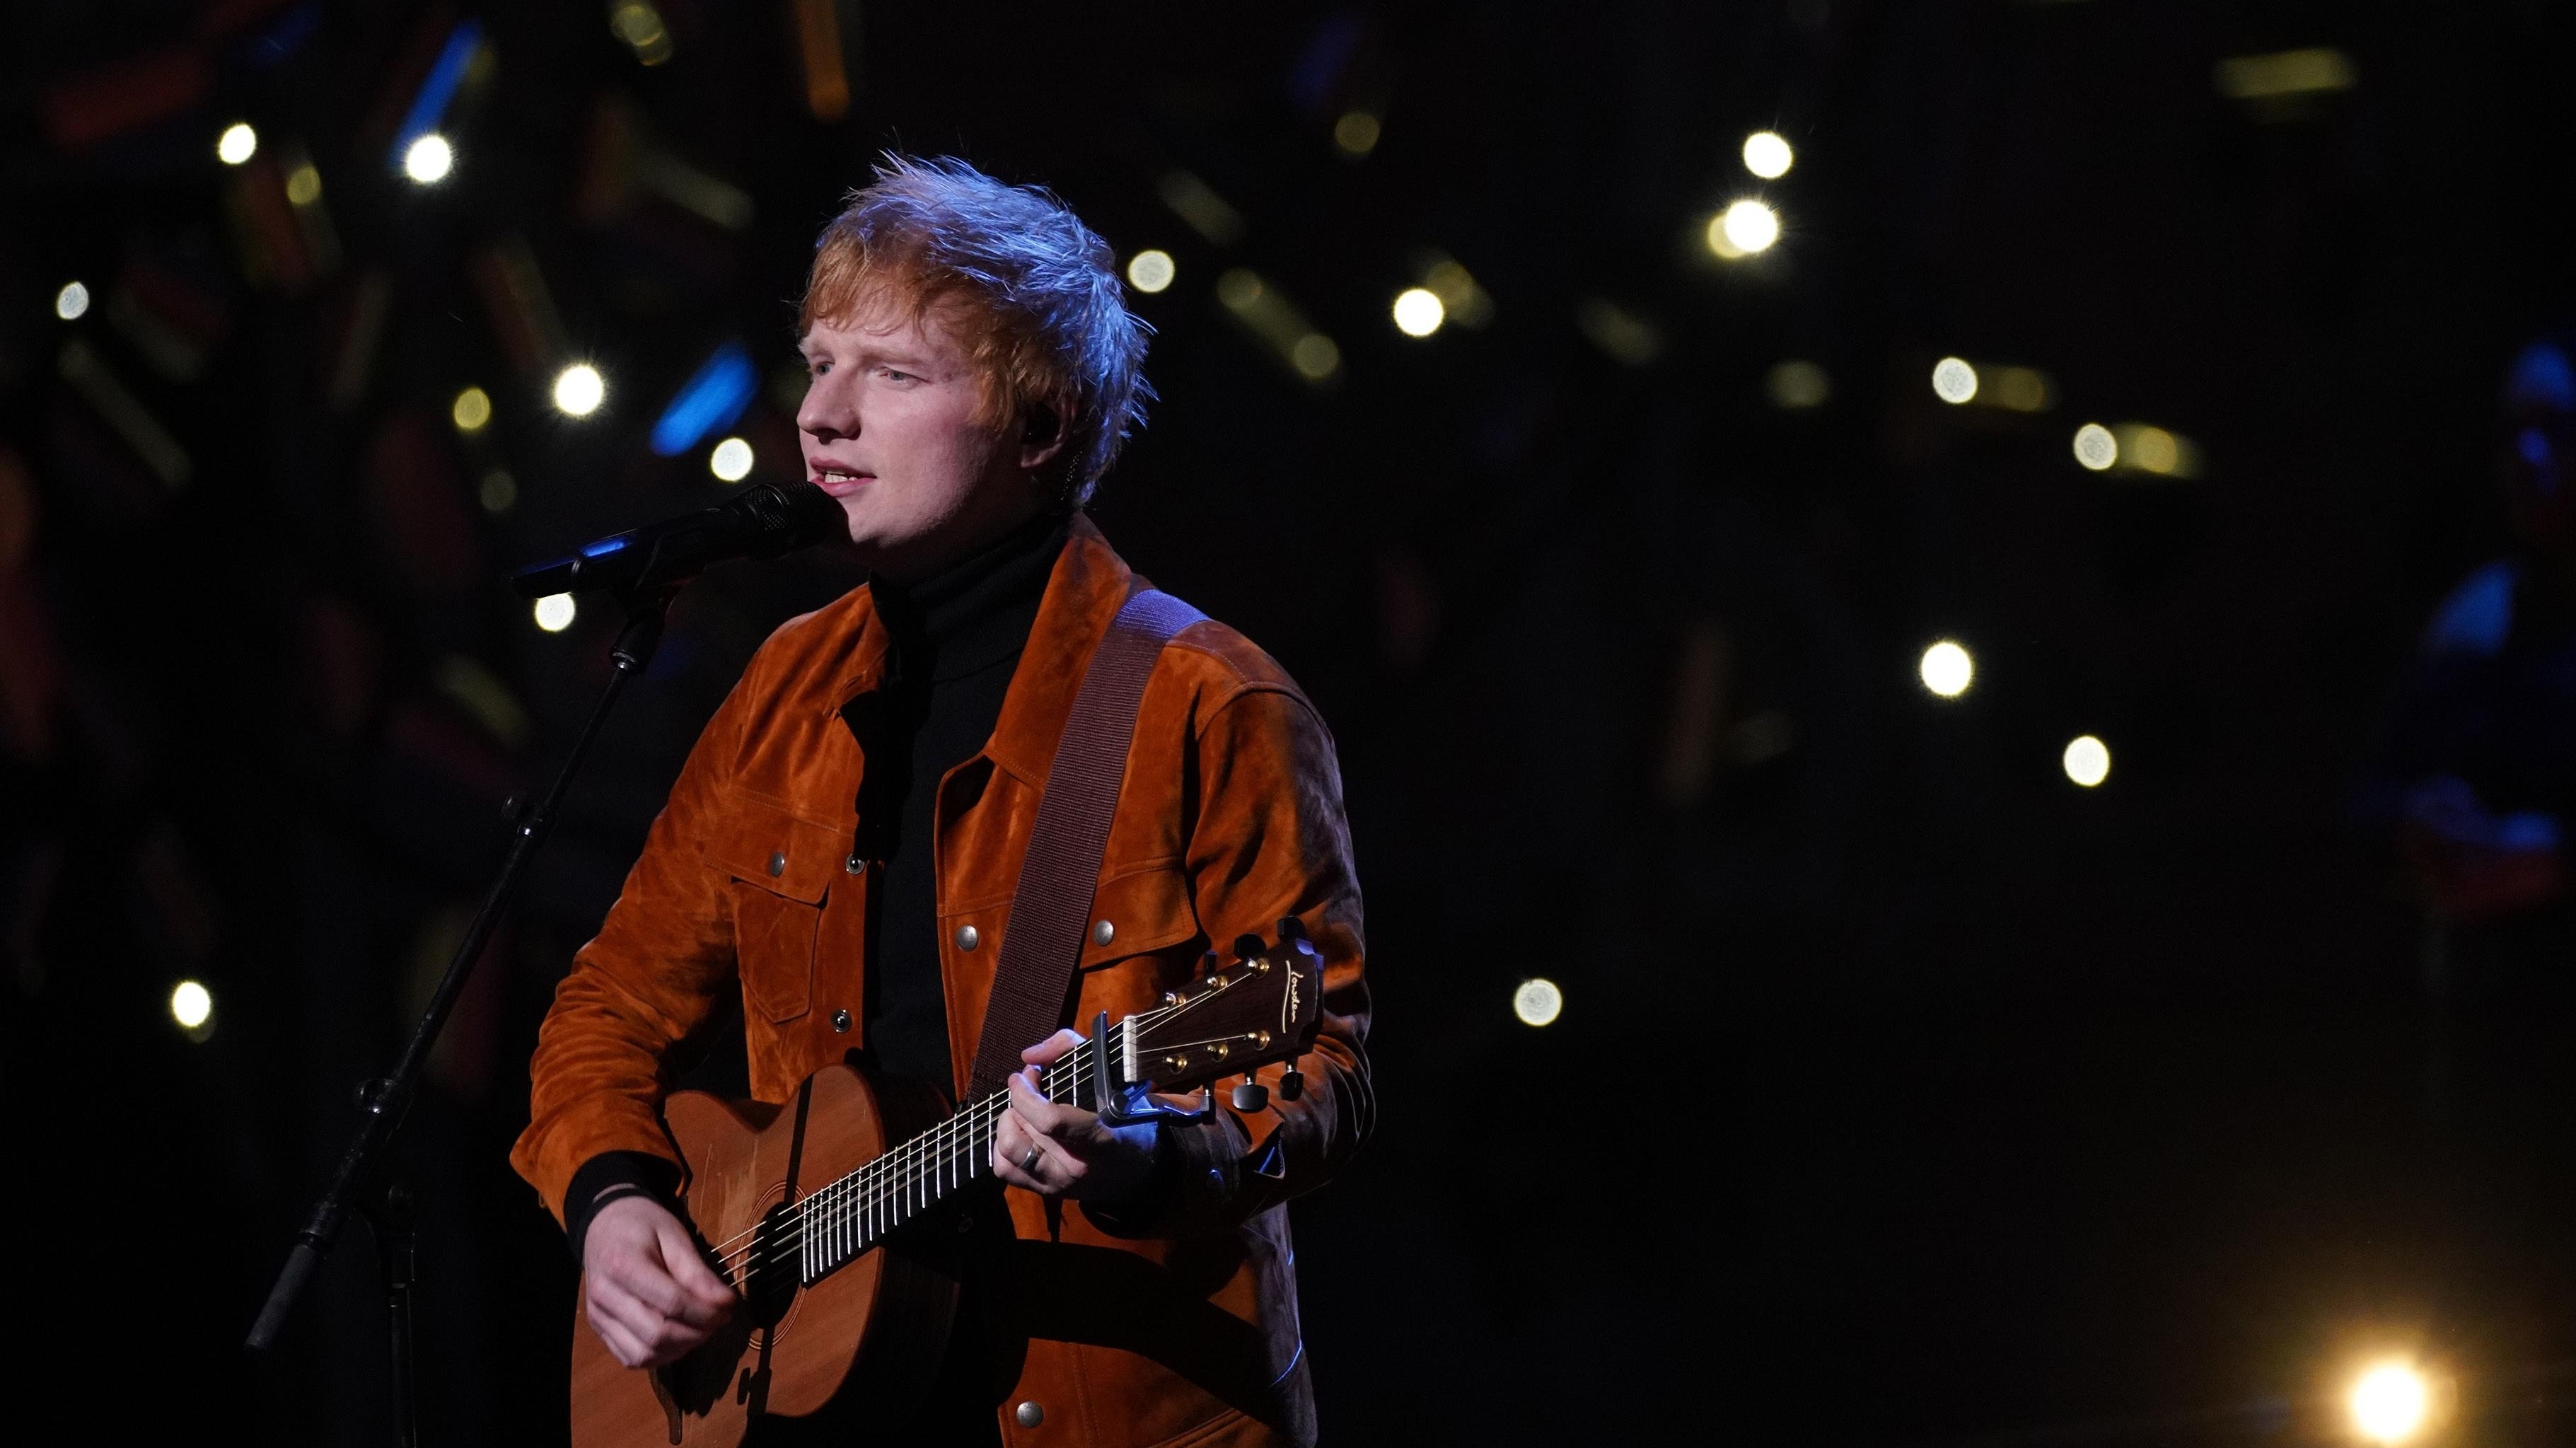 Ed Sheeran tests positive for COVID-19 just after being announced as next SNL musical guest